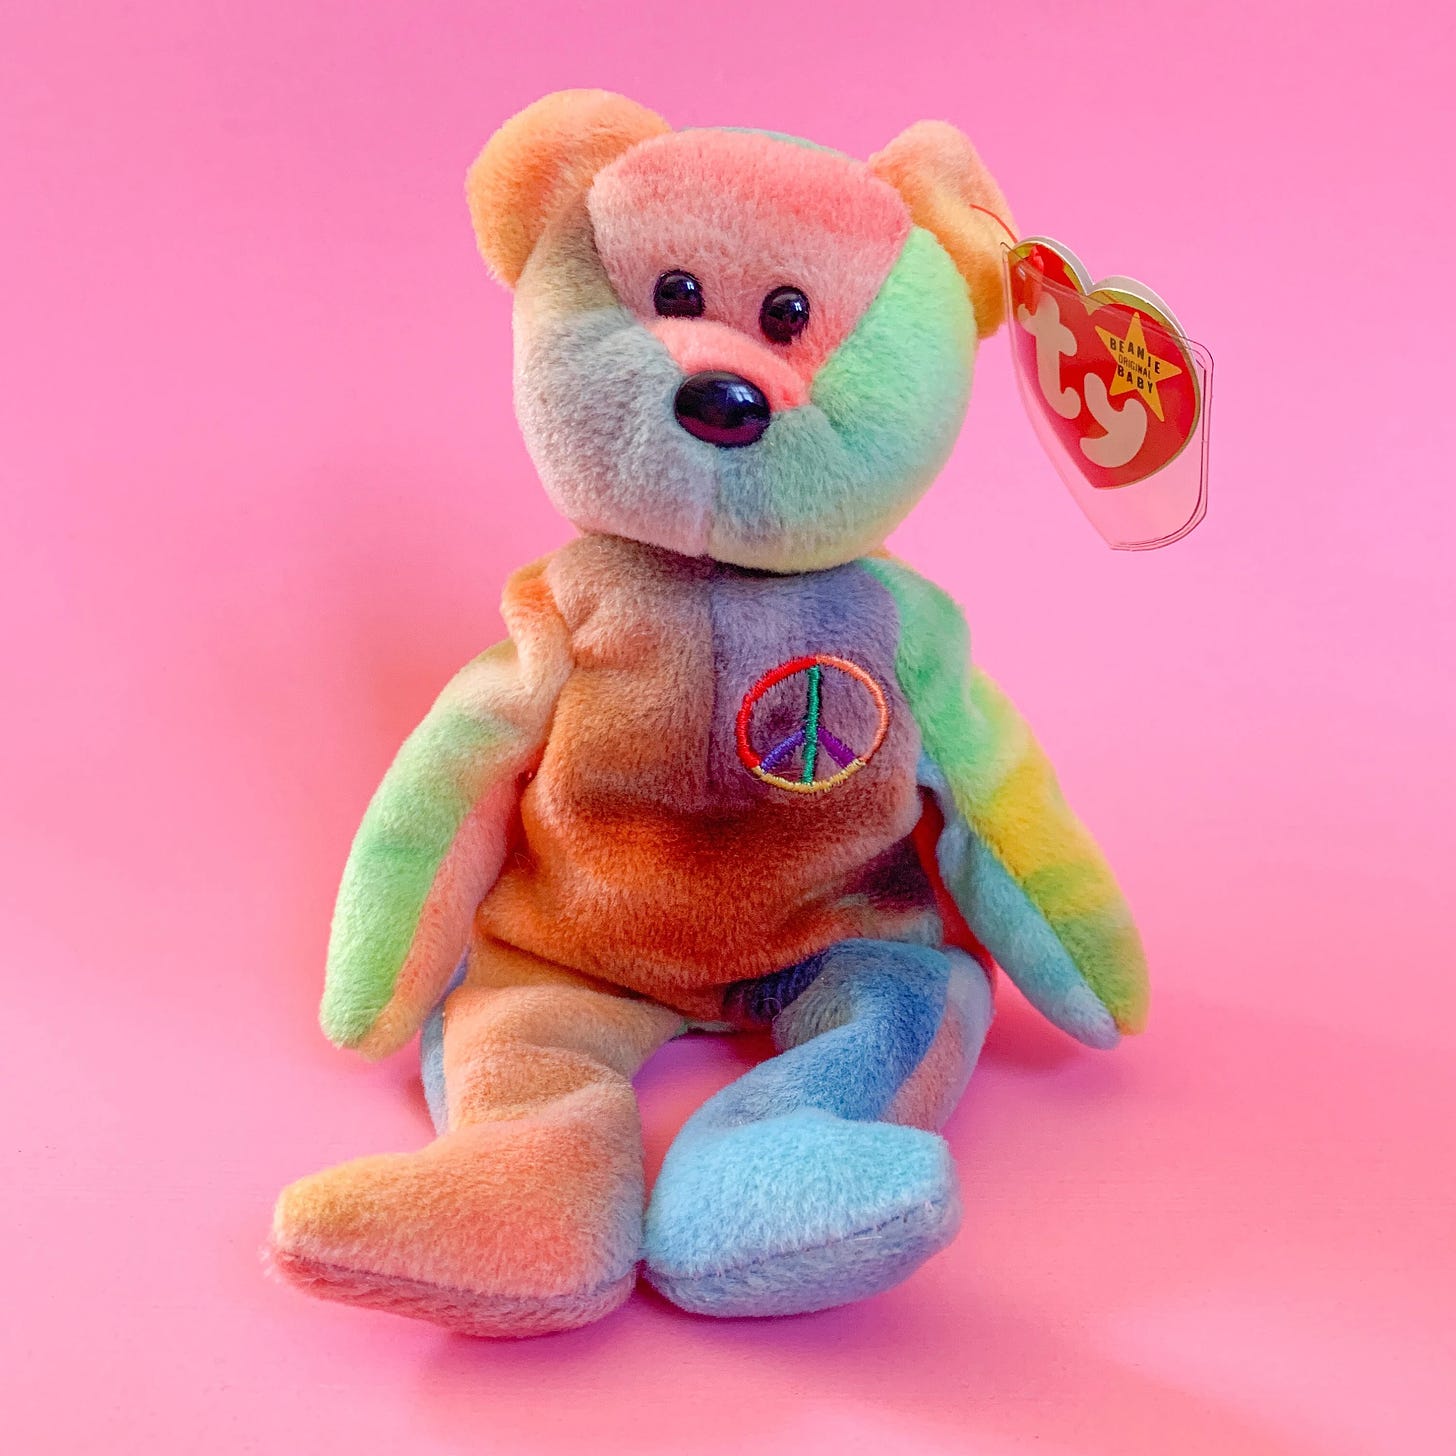 In image of a tie-dye Beanie Babie named "Peace" in front of a pastel pink background.